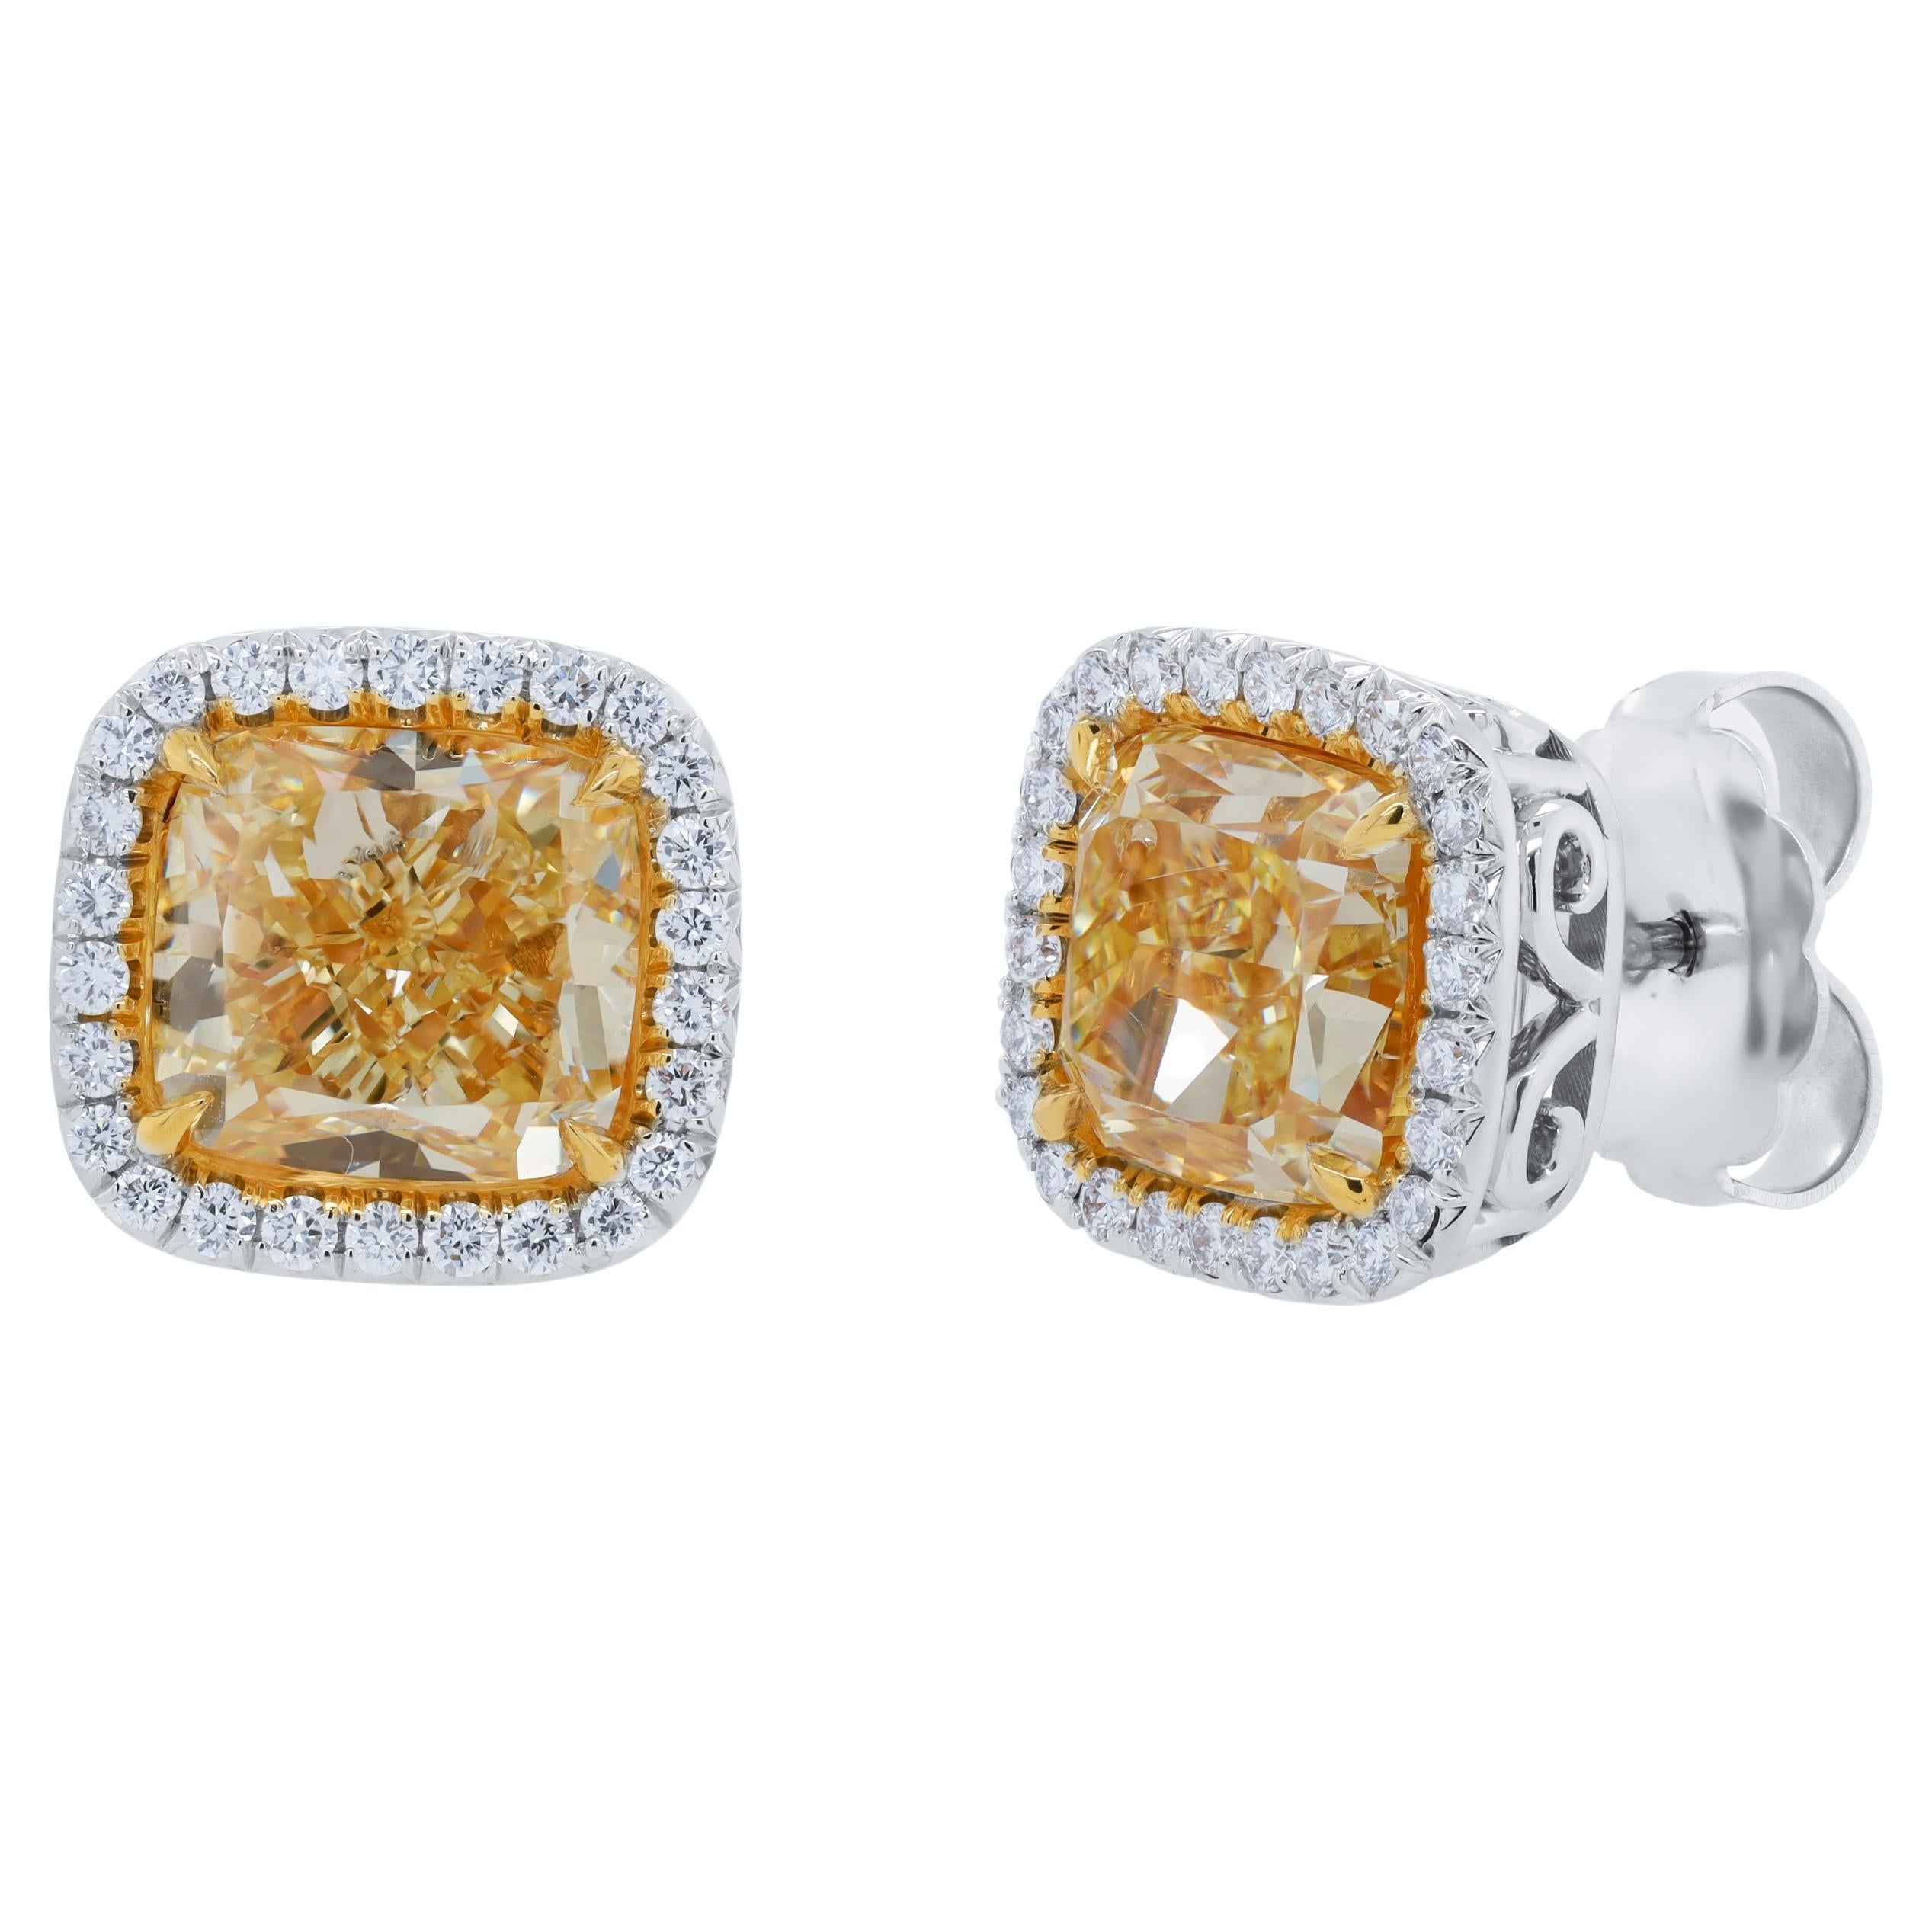 Diana M. 18KT Platinum Diamond studs, features 4.00 + 4.02ct  FY-VS1 GIA For Sale